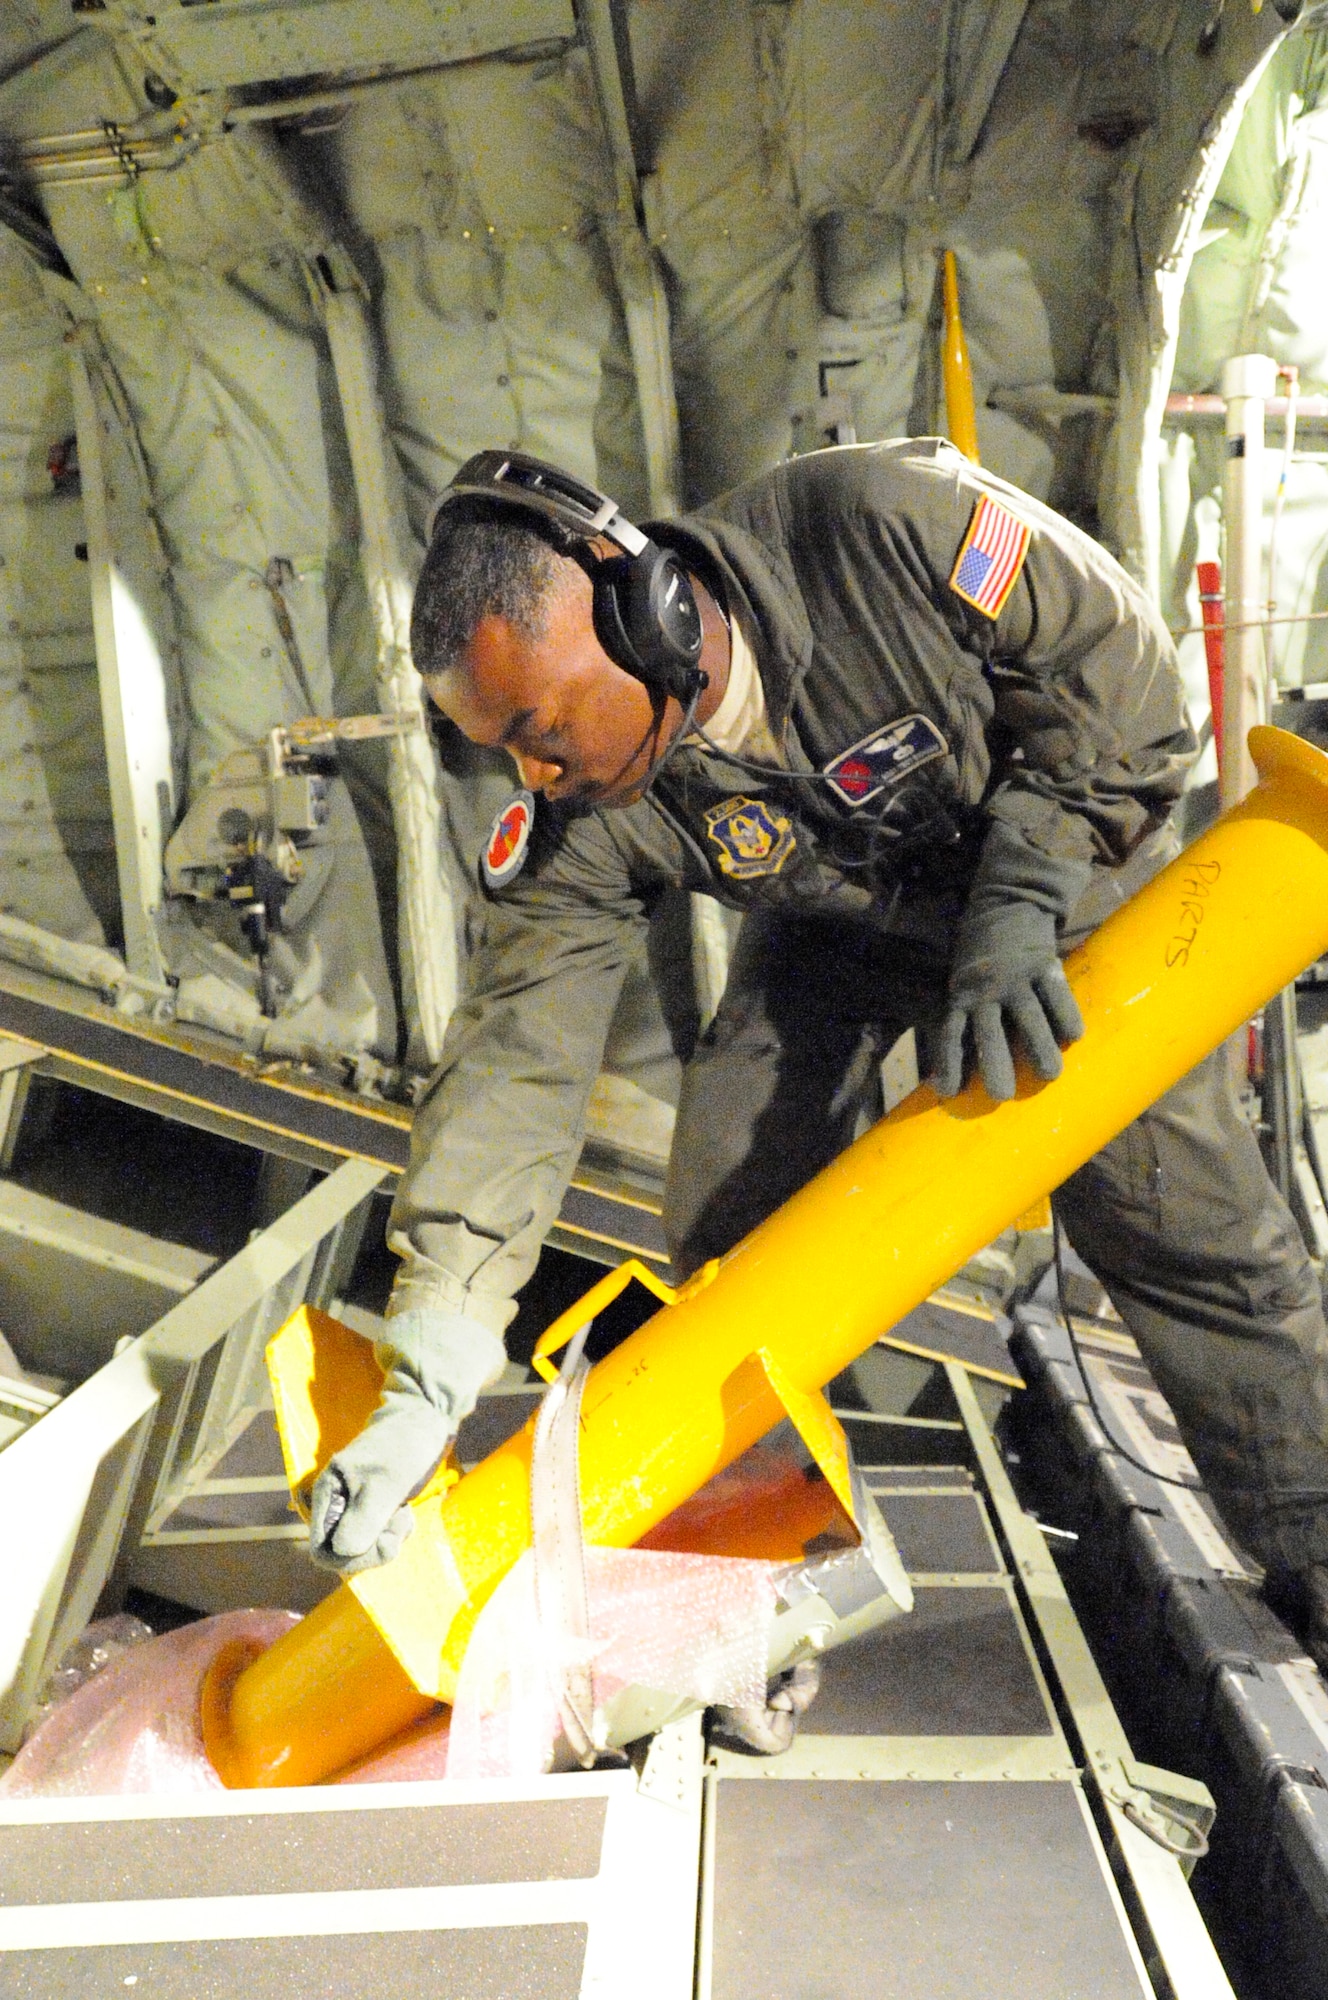 Master Sgt. Troy Bickham, 53rd Weather Reconnaissance Squadron loadmaster and dropsonde operator, pulls the handle on the launch adapter to release an Airborne/Air Expendable Bathythermograph, or AXBT, buoy used by the U.S. Navy to collect the salinity and water temperature during a flight through Hurricane Iselle off the coast of Hawaii Aug. 7, 2014. The 53rd WRS “Hurricane Hunters” and 403rd Wing maintenance personnel deployed to Joint Base Pearl Harbor-Hickam, Hawaii, to fly storm missions into Hurricanes Iselle and Julio to gather data to assist the National Weather Service's Central Pacific Hurricane Center with their forecasts. (U.S. Air Force photo/Master Sgt. Jessica Kendziorek)